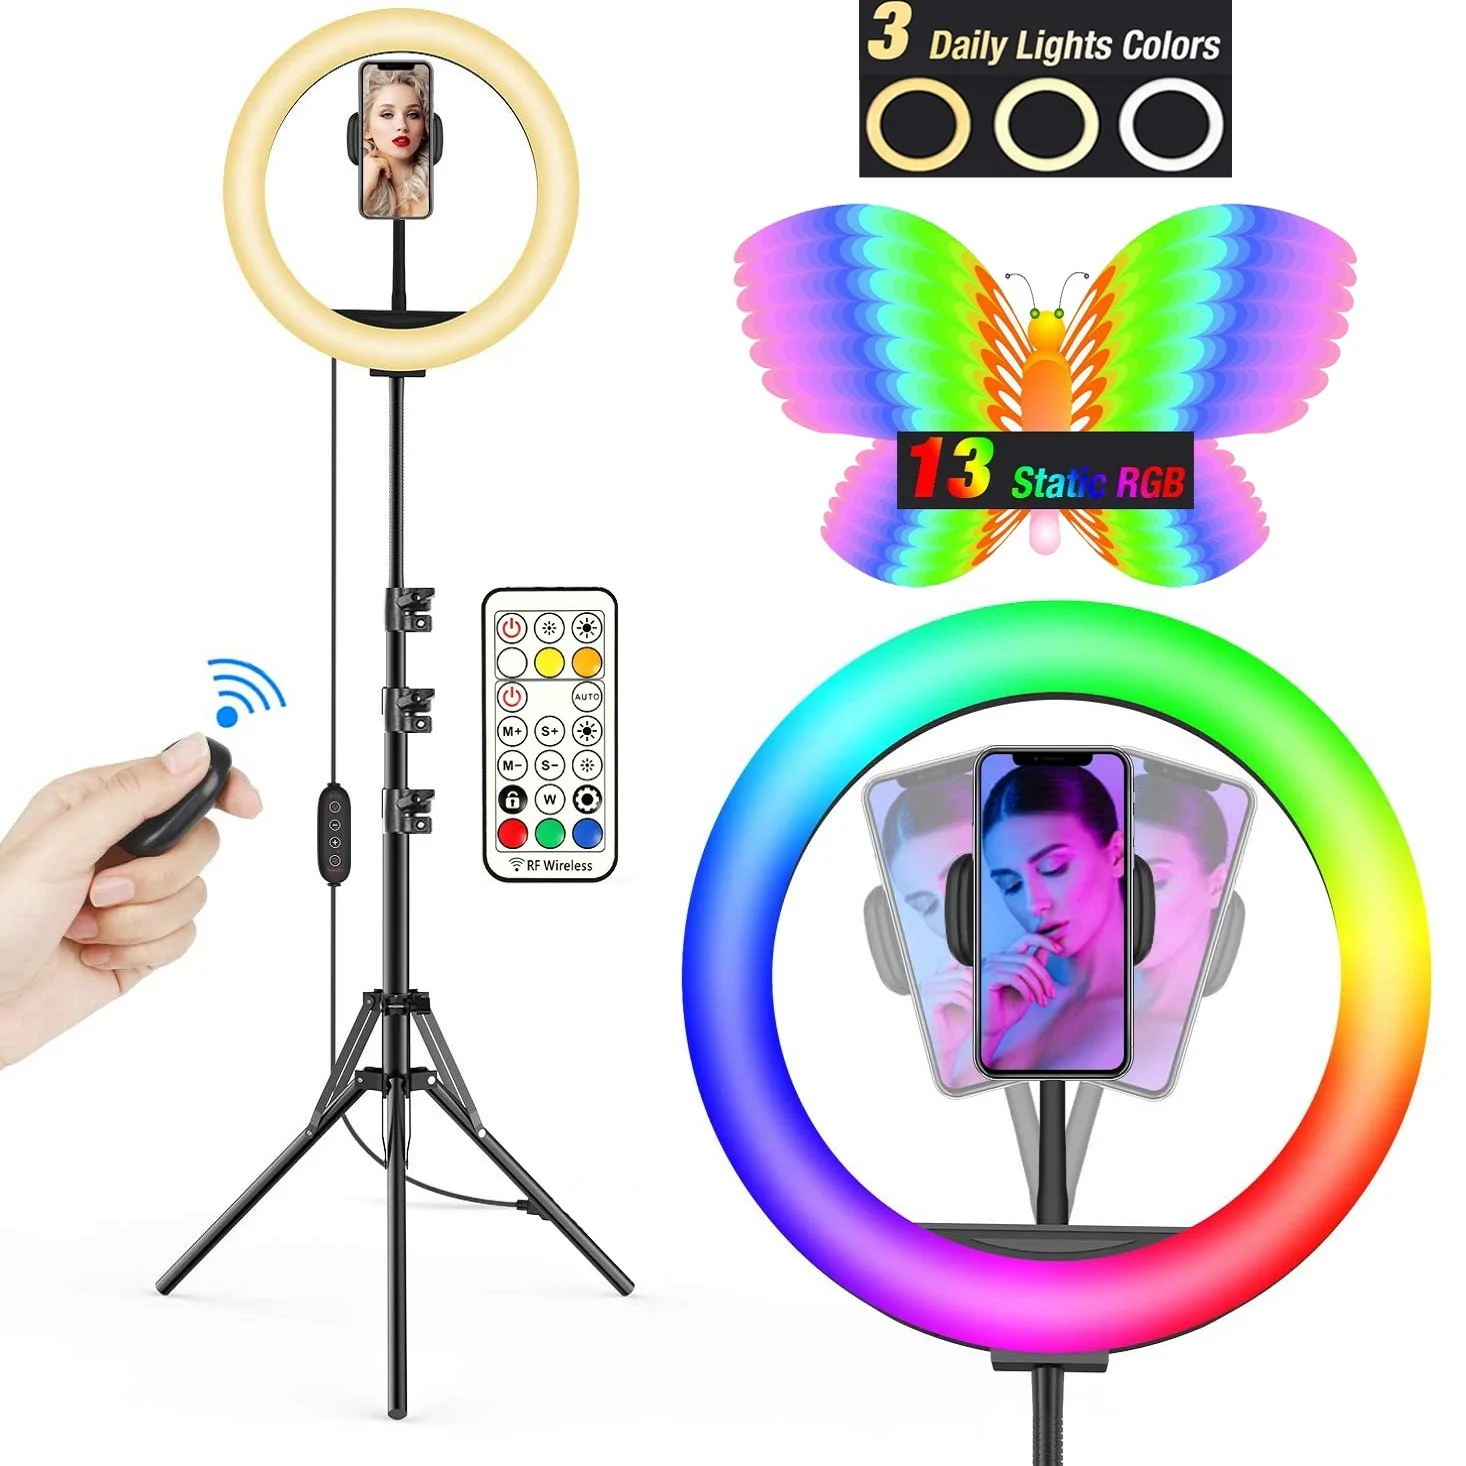 

10in RGB LED Selfie Ring Light Photography RingLight Circle Dimmable Lamp Tripod Fill Light Phone Stand Holder Trepied Makeup